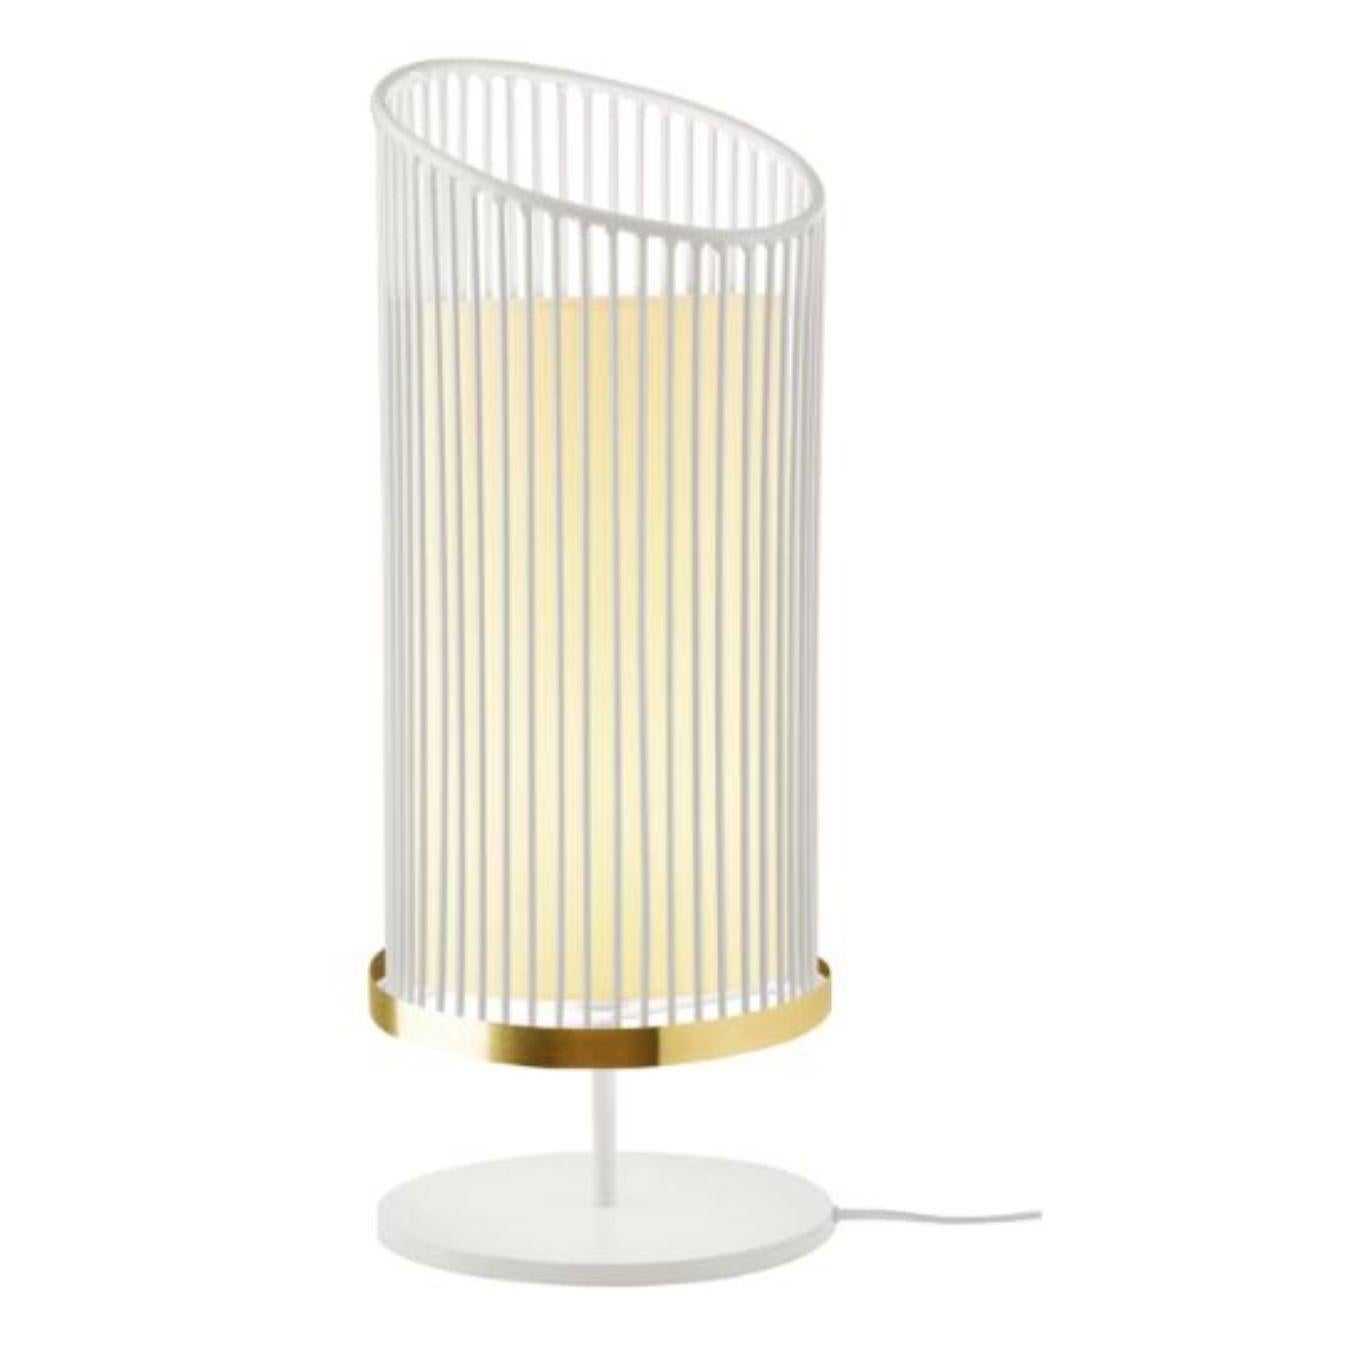 Ivory new spider table lamp with brass Ring by Dooq.
Dimensions: W 24 x D 24 x H 60 cm.
Materials: lacquered metal, polished or brushed metal, brass.
Also available in different colors and materials. 

Information:
230V/50Hz
E27/1x20W